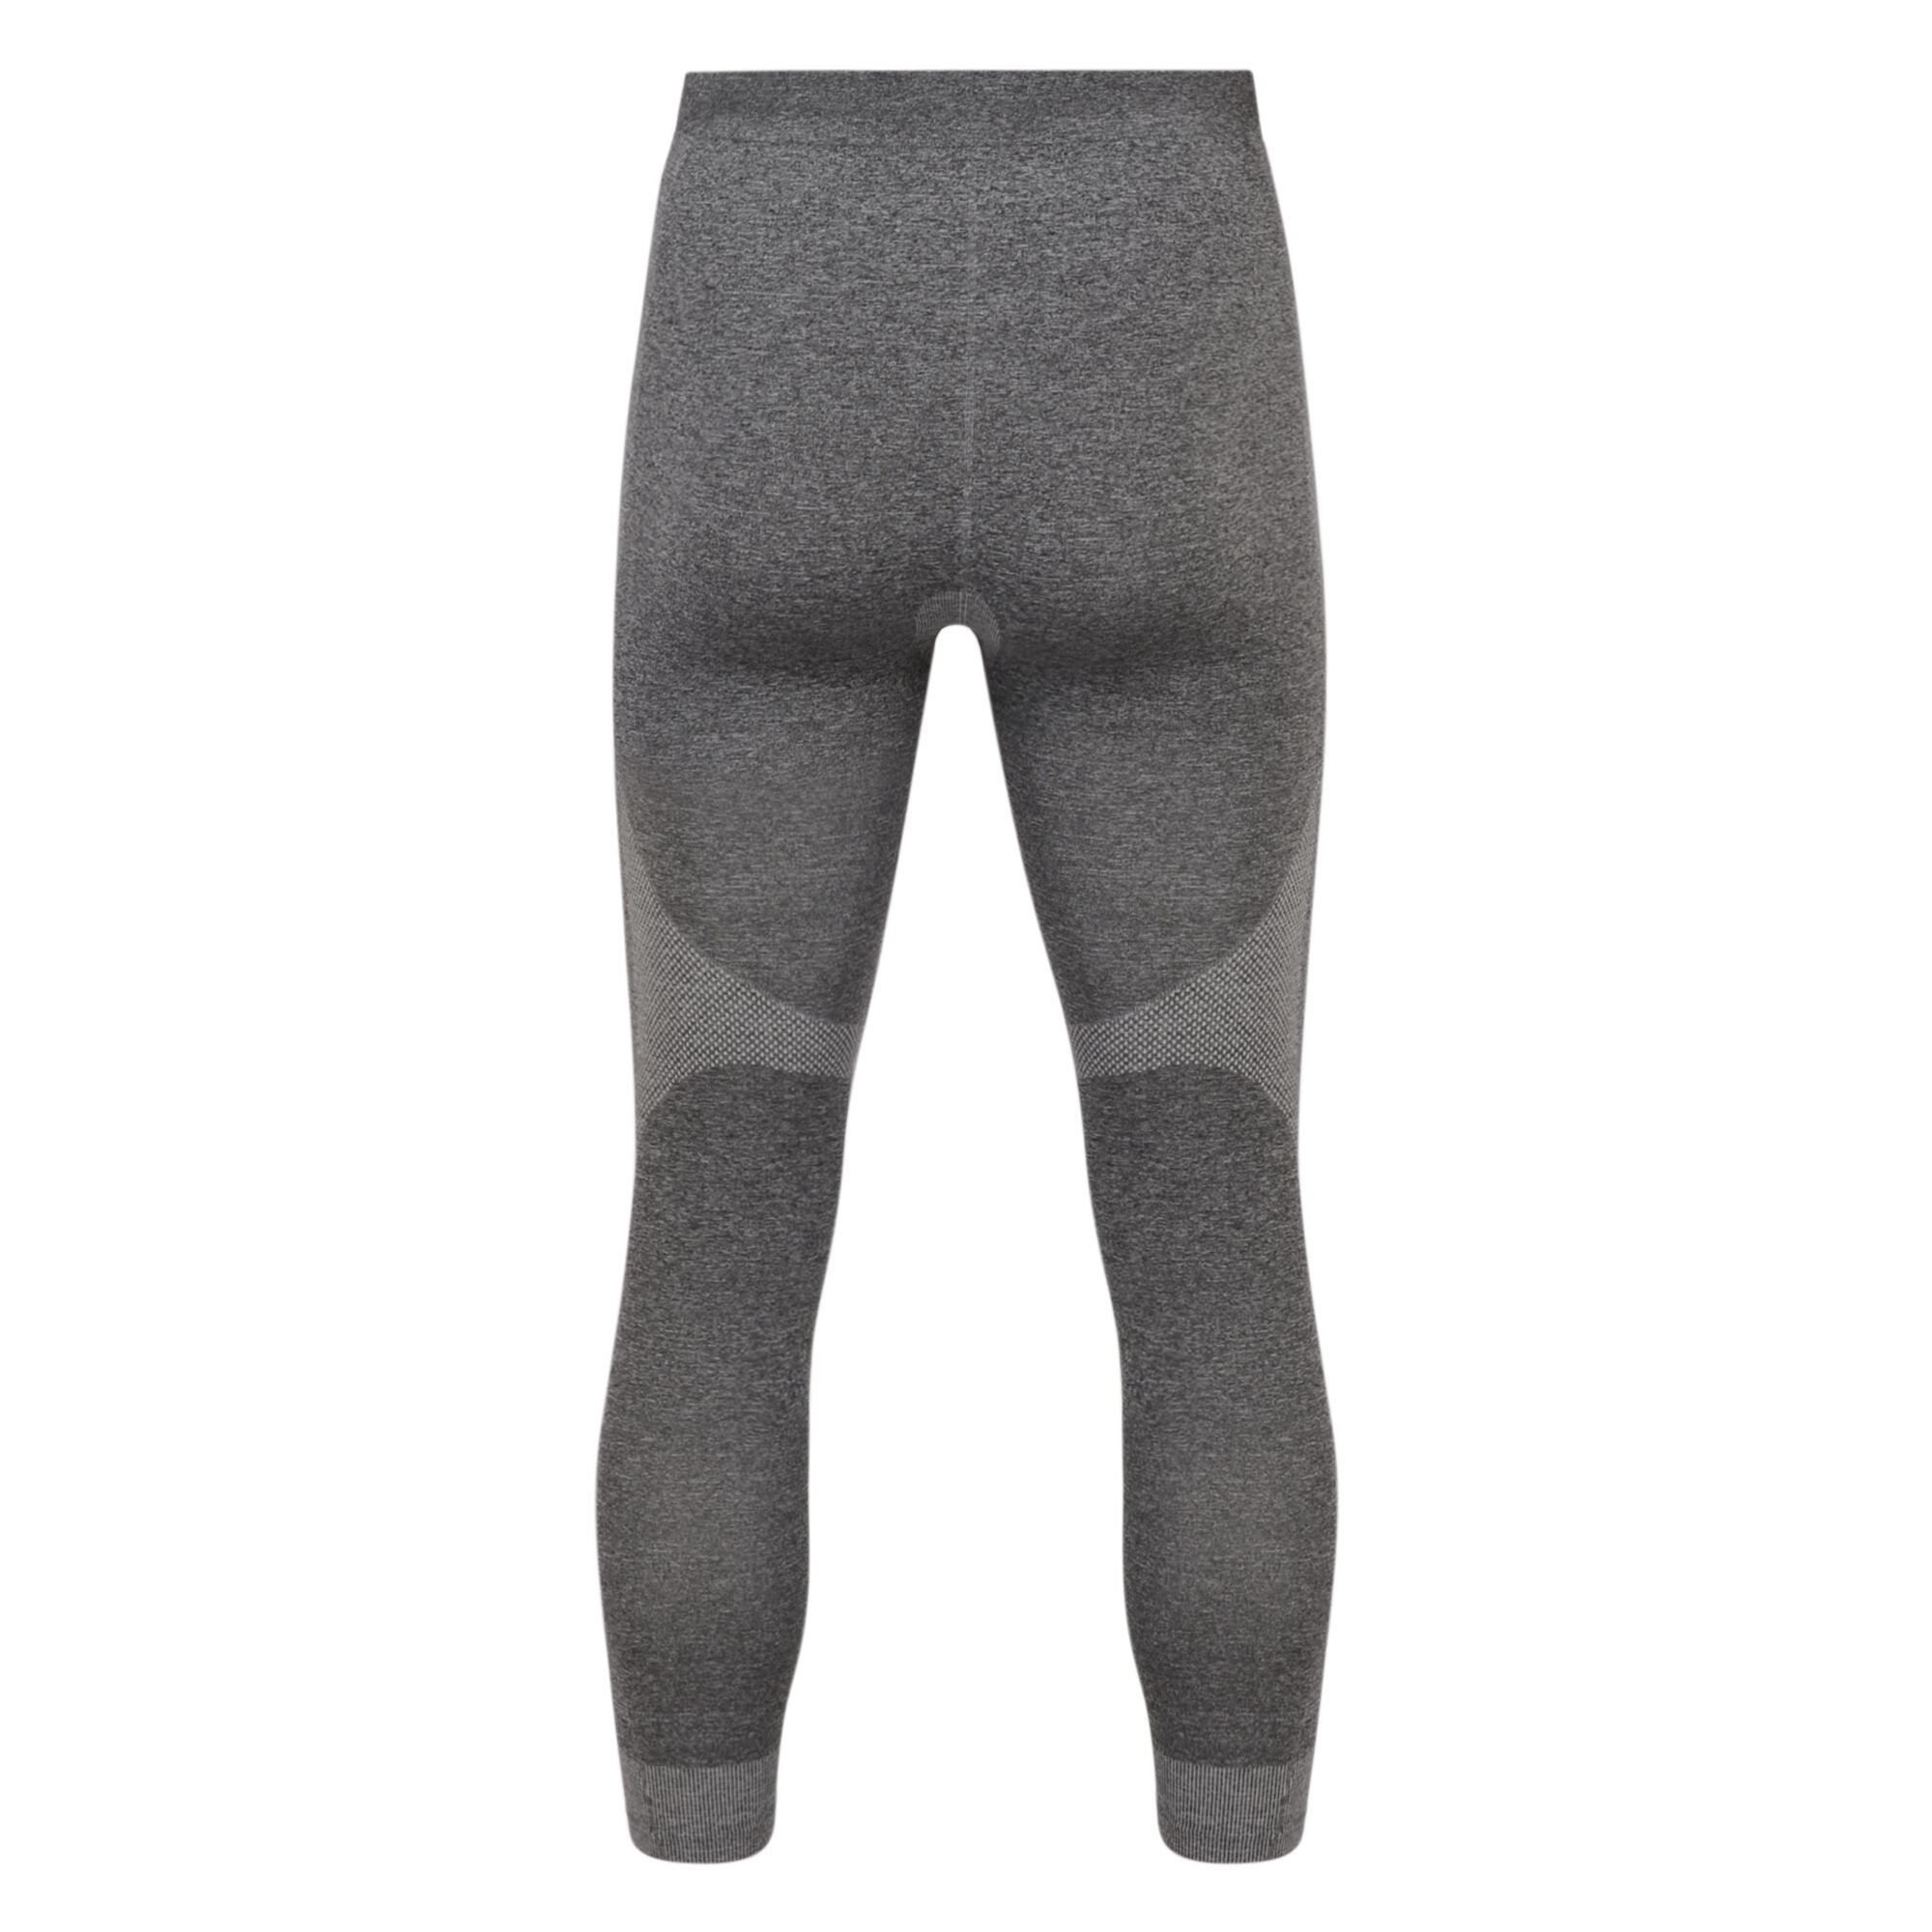 Material: 68% Polyester, 26% Polyamide, 6% Elastane. Performance base layer collection. SeamSmart Technology. Q-Wic Seamless polyester/ elastane knitted fabric. Ergonomic body map fit. Fast wicking and quick drying properties.  odour control treatment. Dare 2B Mens Tights/Shorts Sizing (waist approx): XS (28in/71cm), S (30in/76cm), M (32in/81cm), L (34in/86cm), XL (36in/92cm), XXL (38in/97cm), XXXL (40in/102cm), XXXXL (42in/107cm), XXXXXL (44in/112cm).